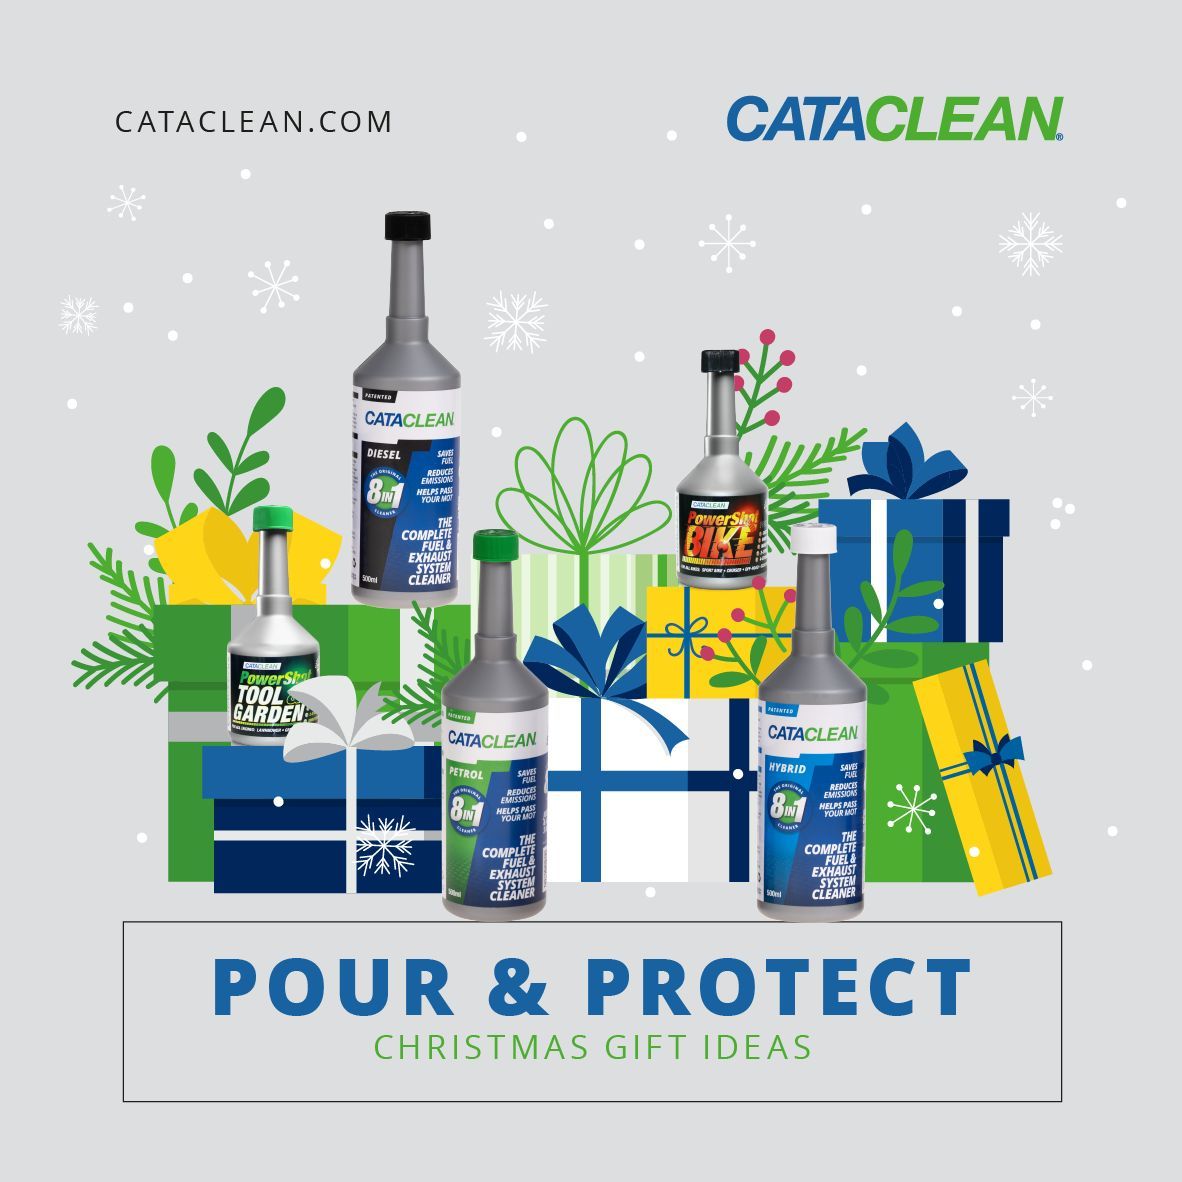 CATACLEAN PowerShot BIKE is a fuel and exhaust system cleaner